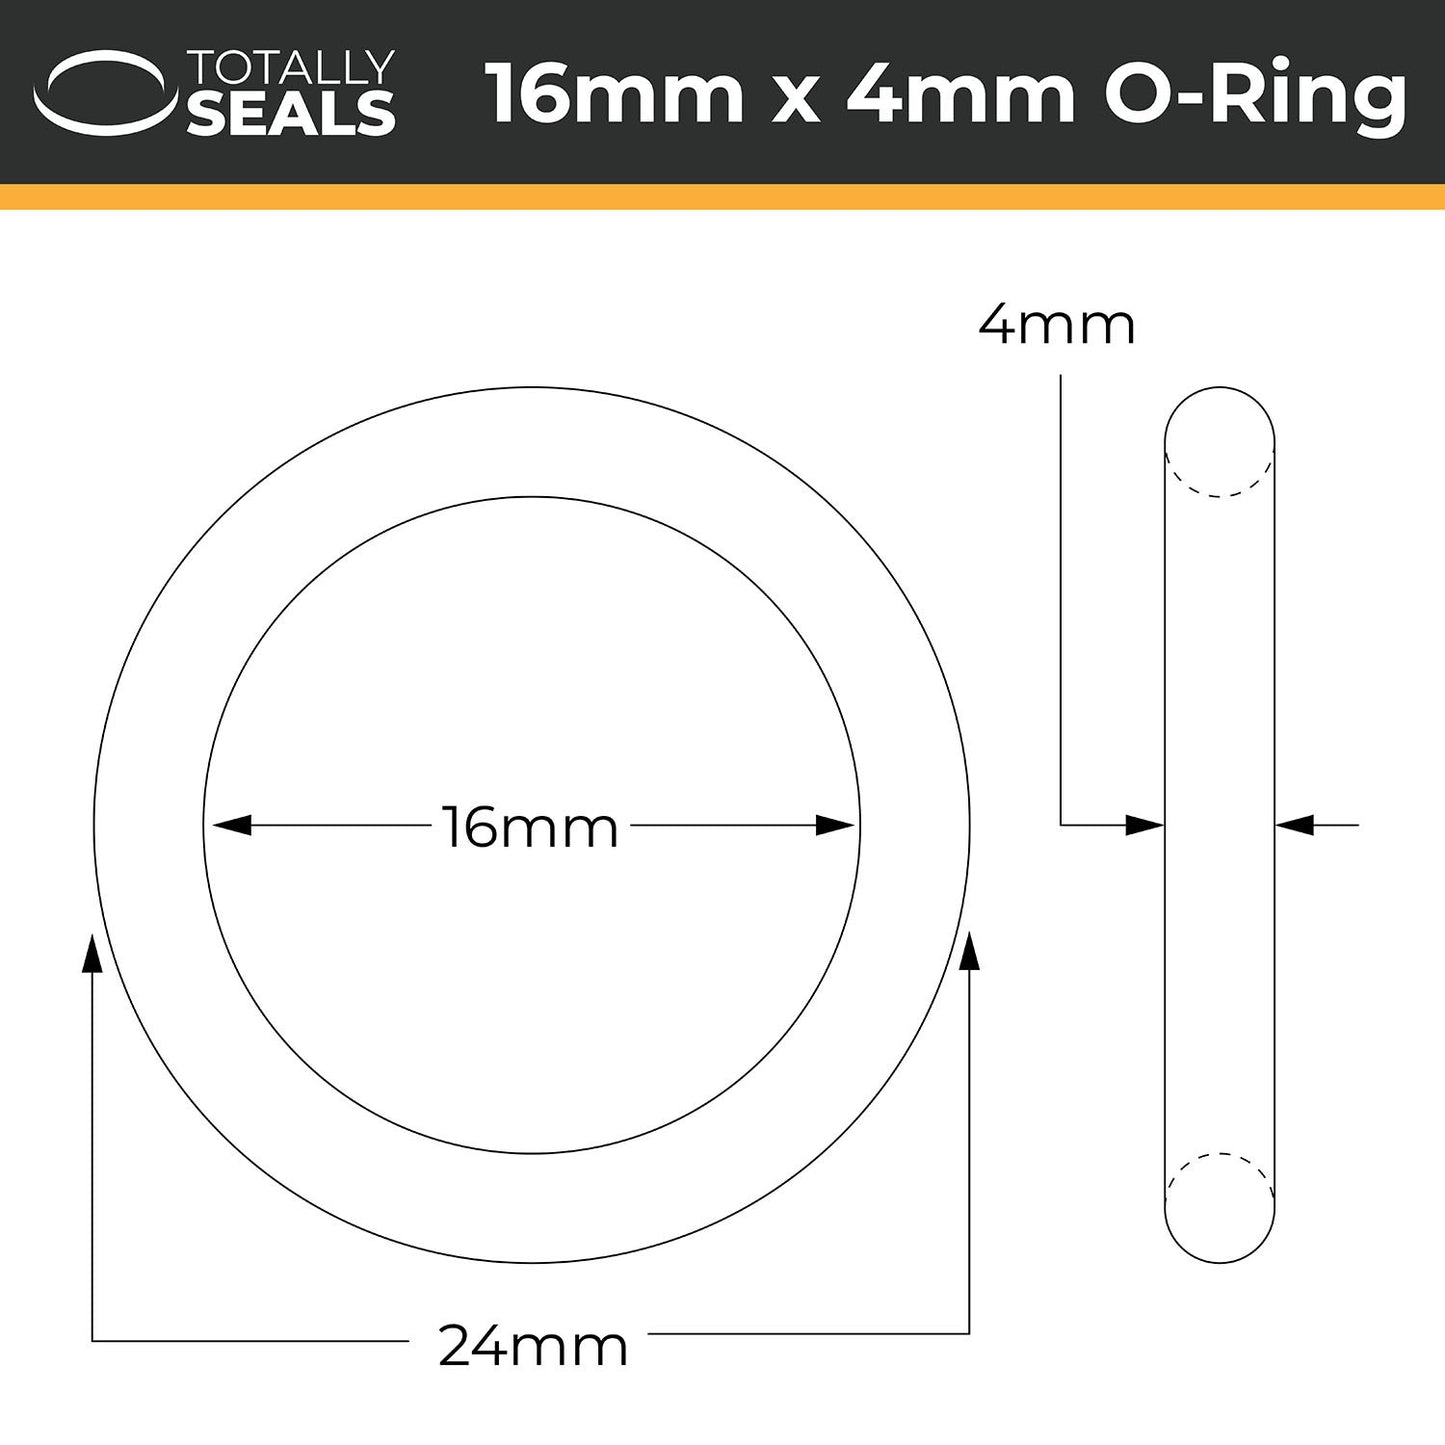 16mm x 4mm (24mm OD) Nitrile O-Rings - Totally Seals®